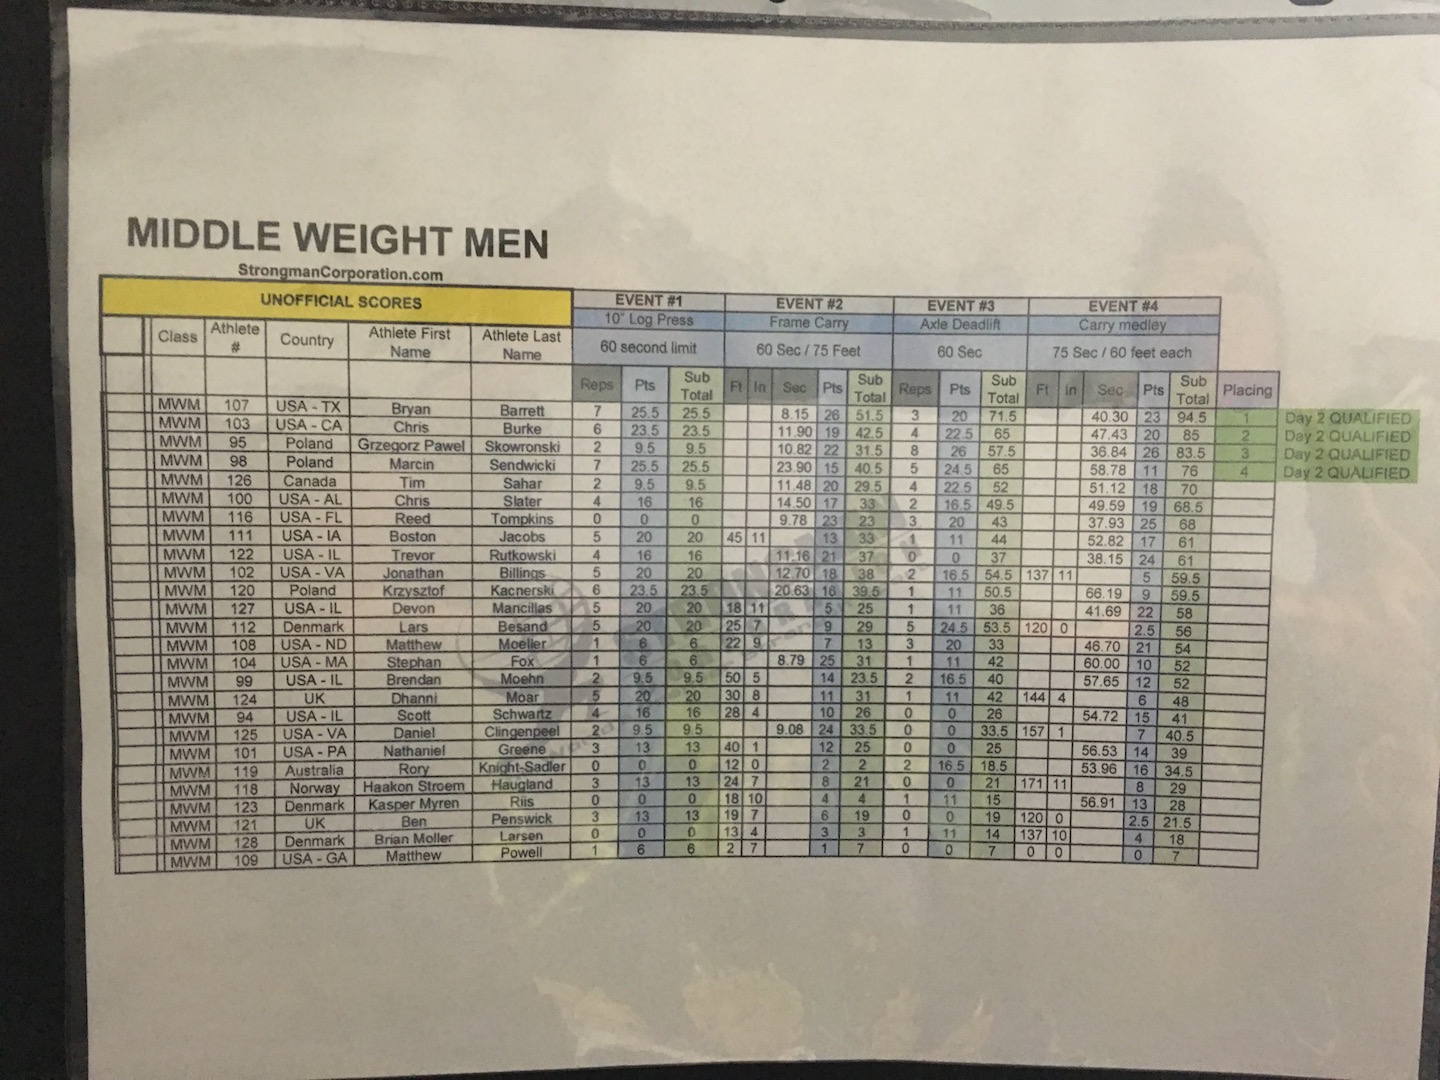 Middleweight Men day 1